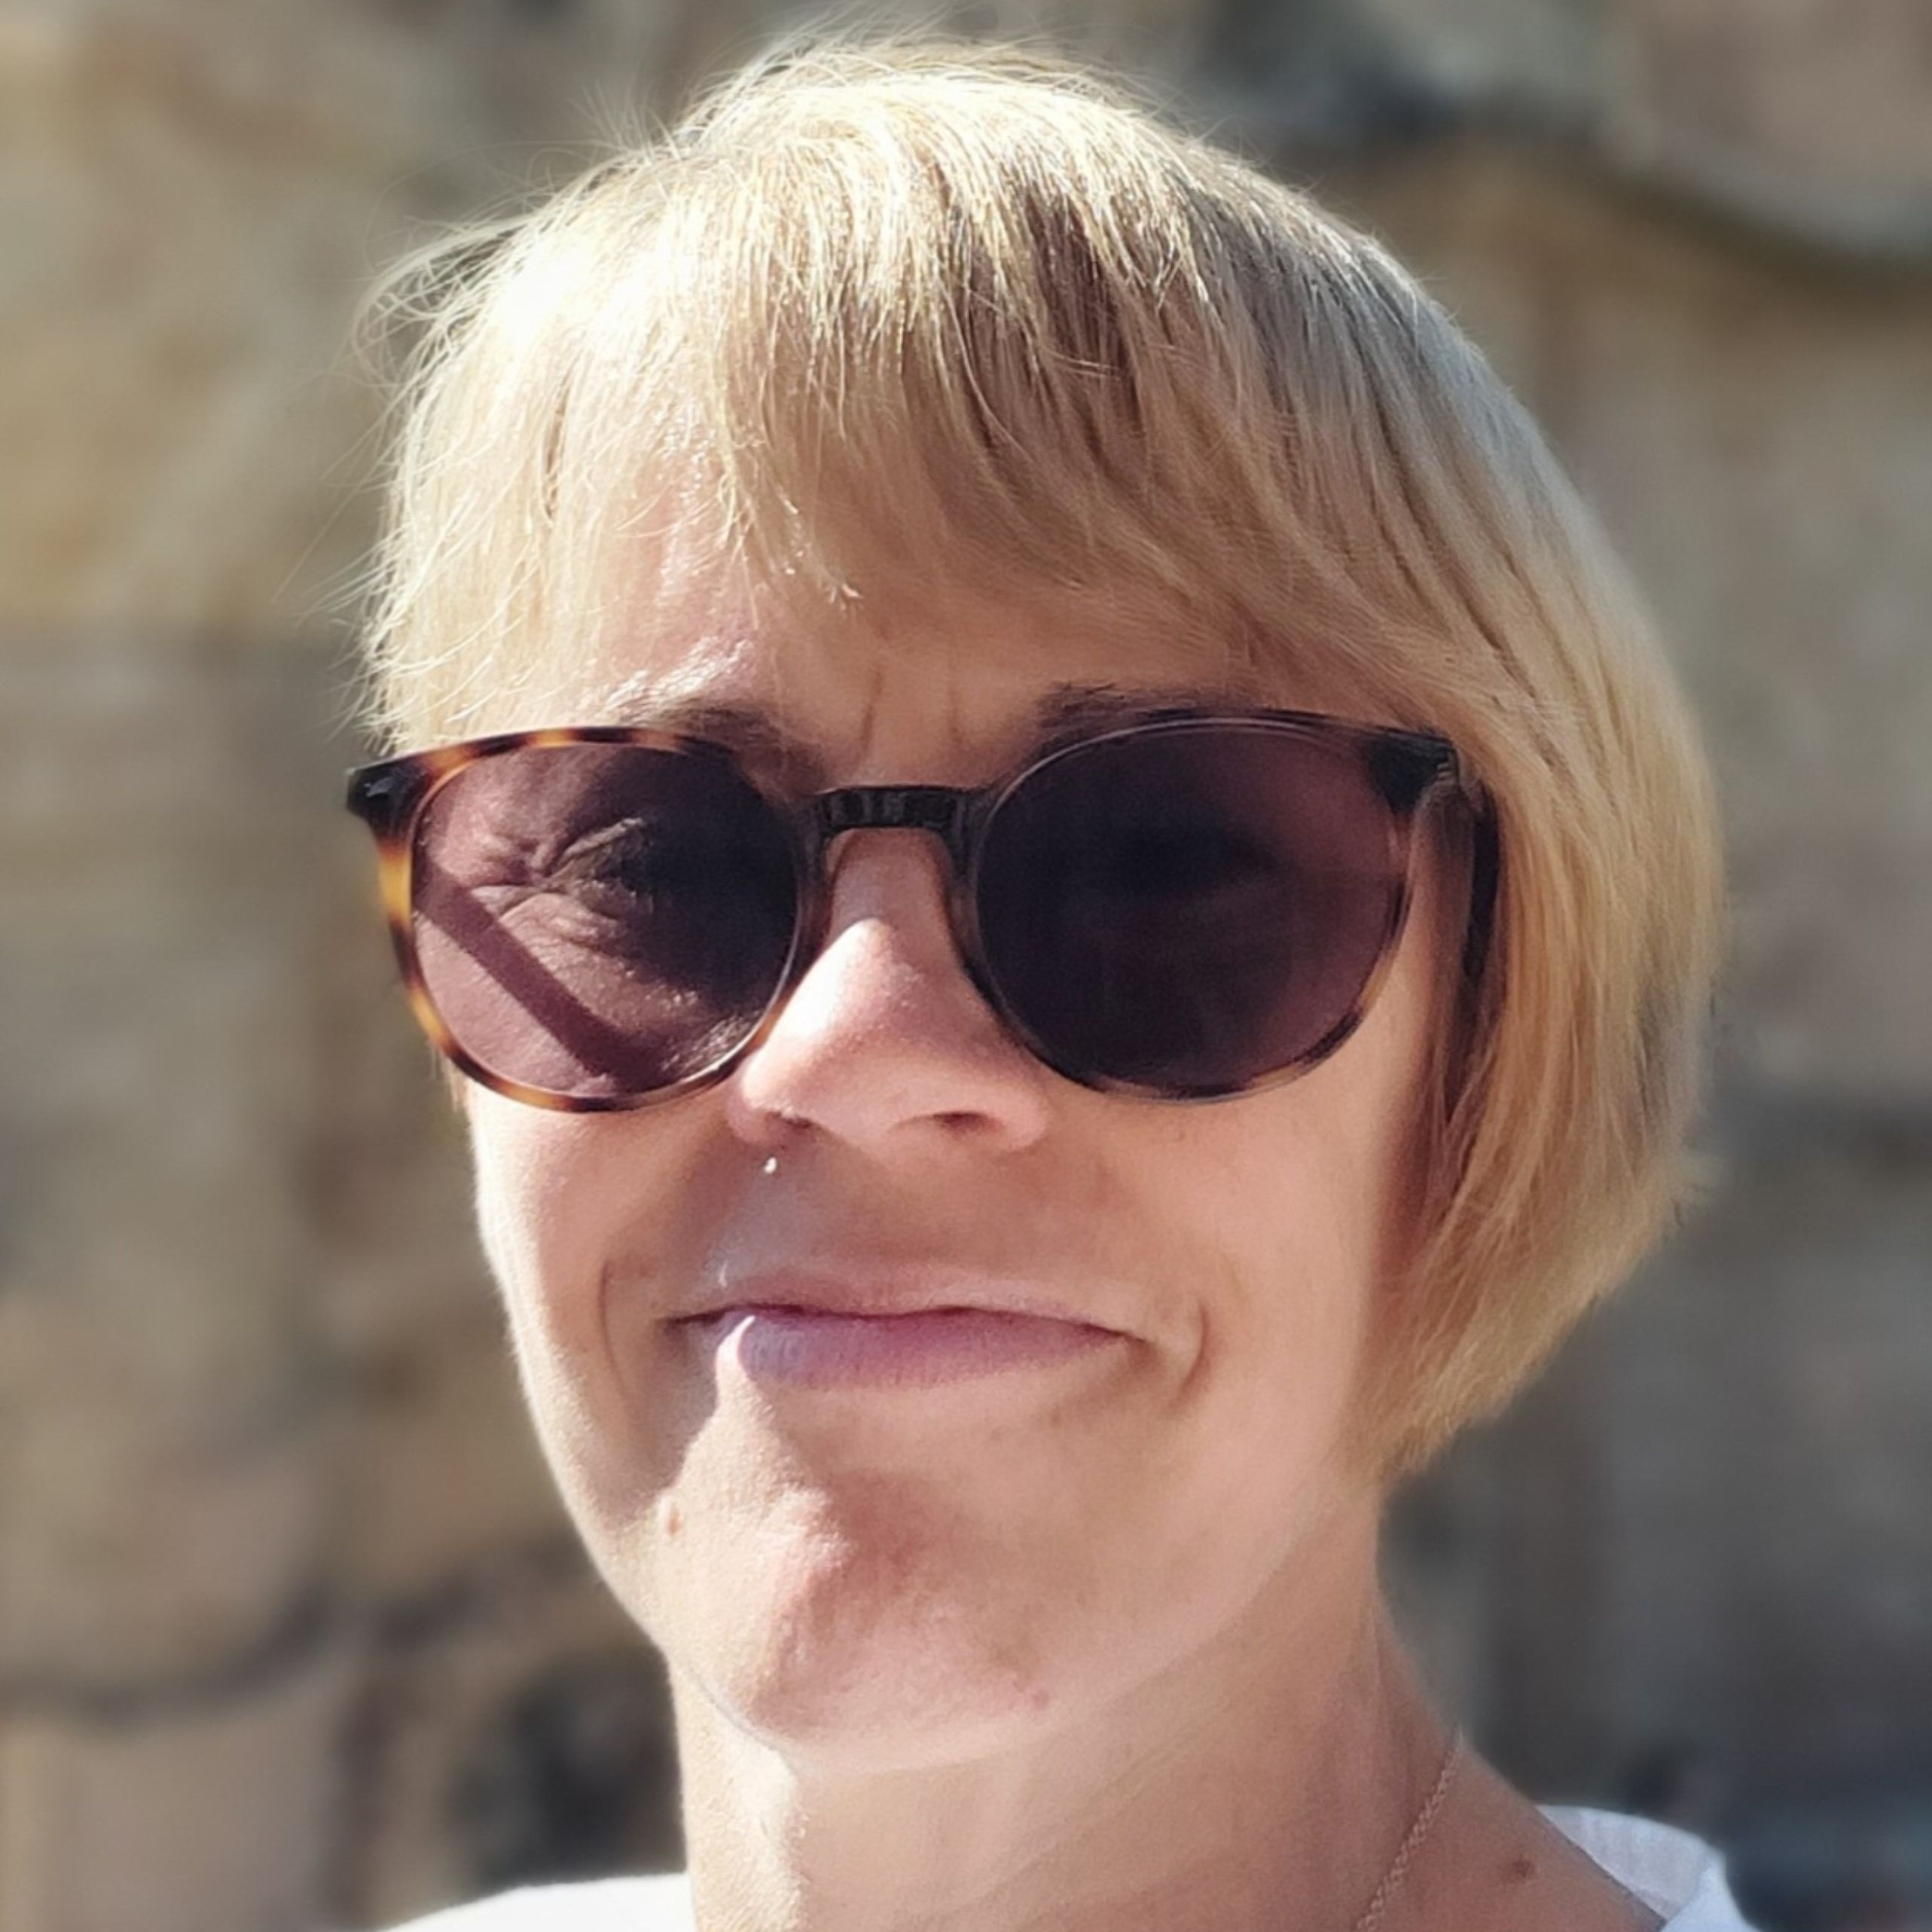 Beth Peal,  wearing sunglasses and smiling at the camera